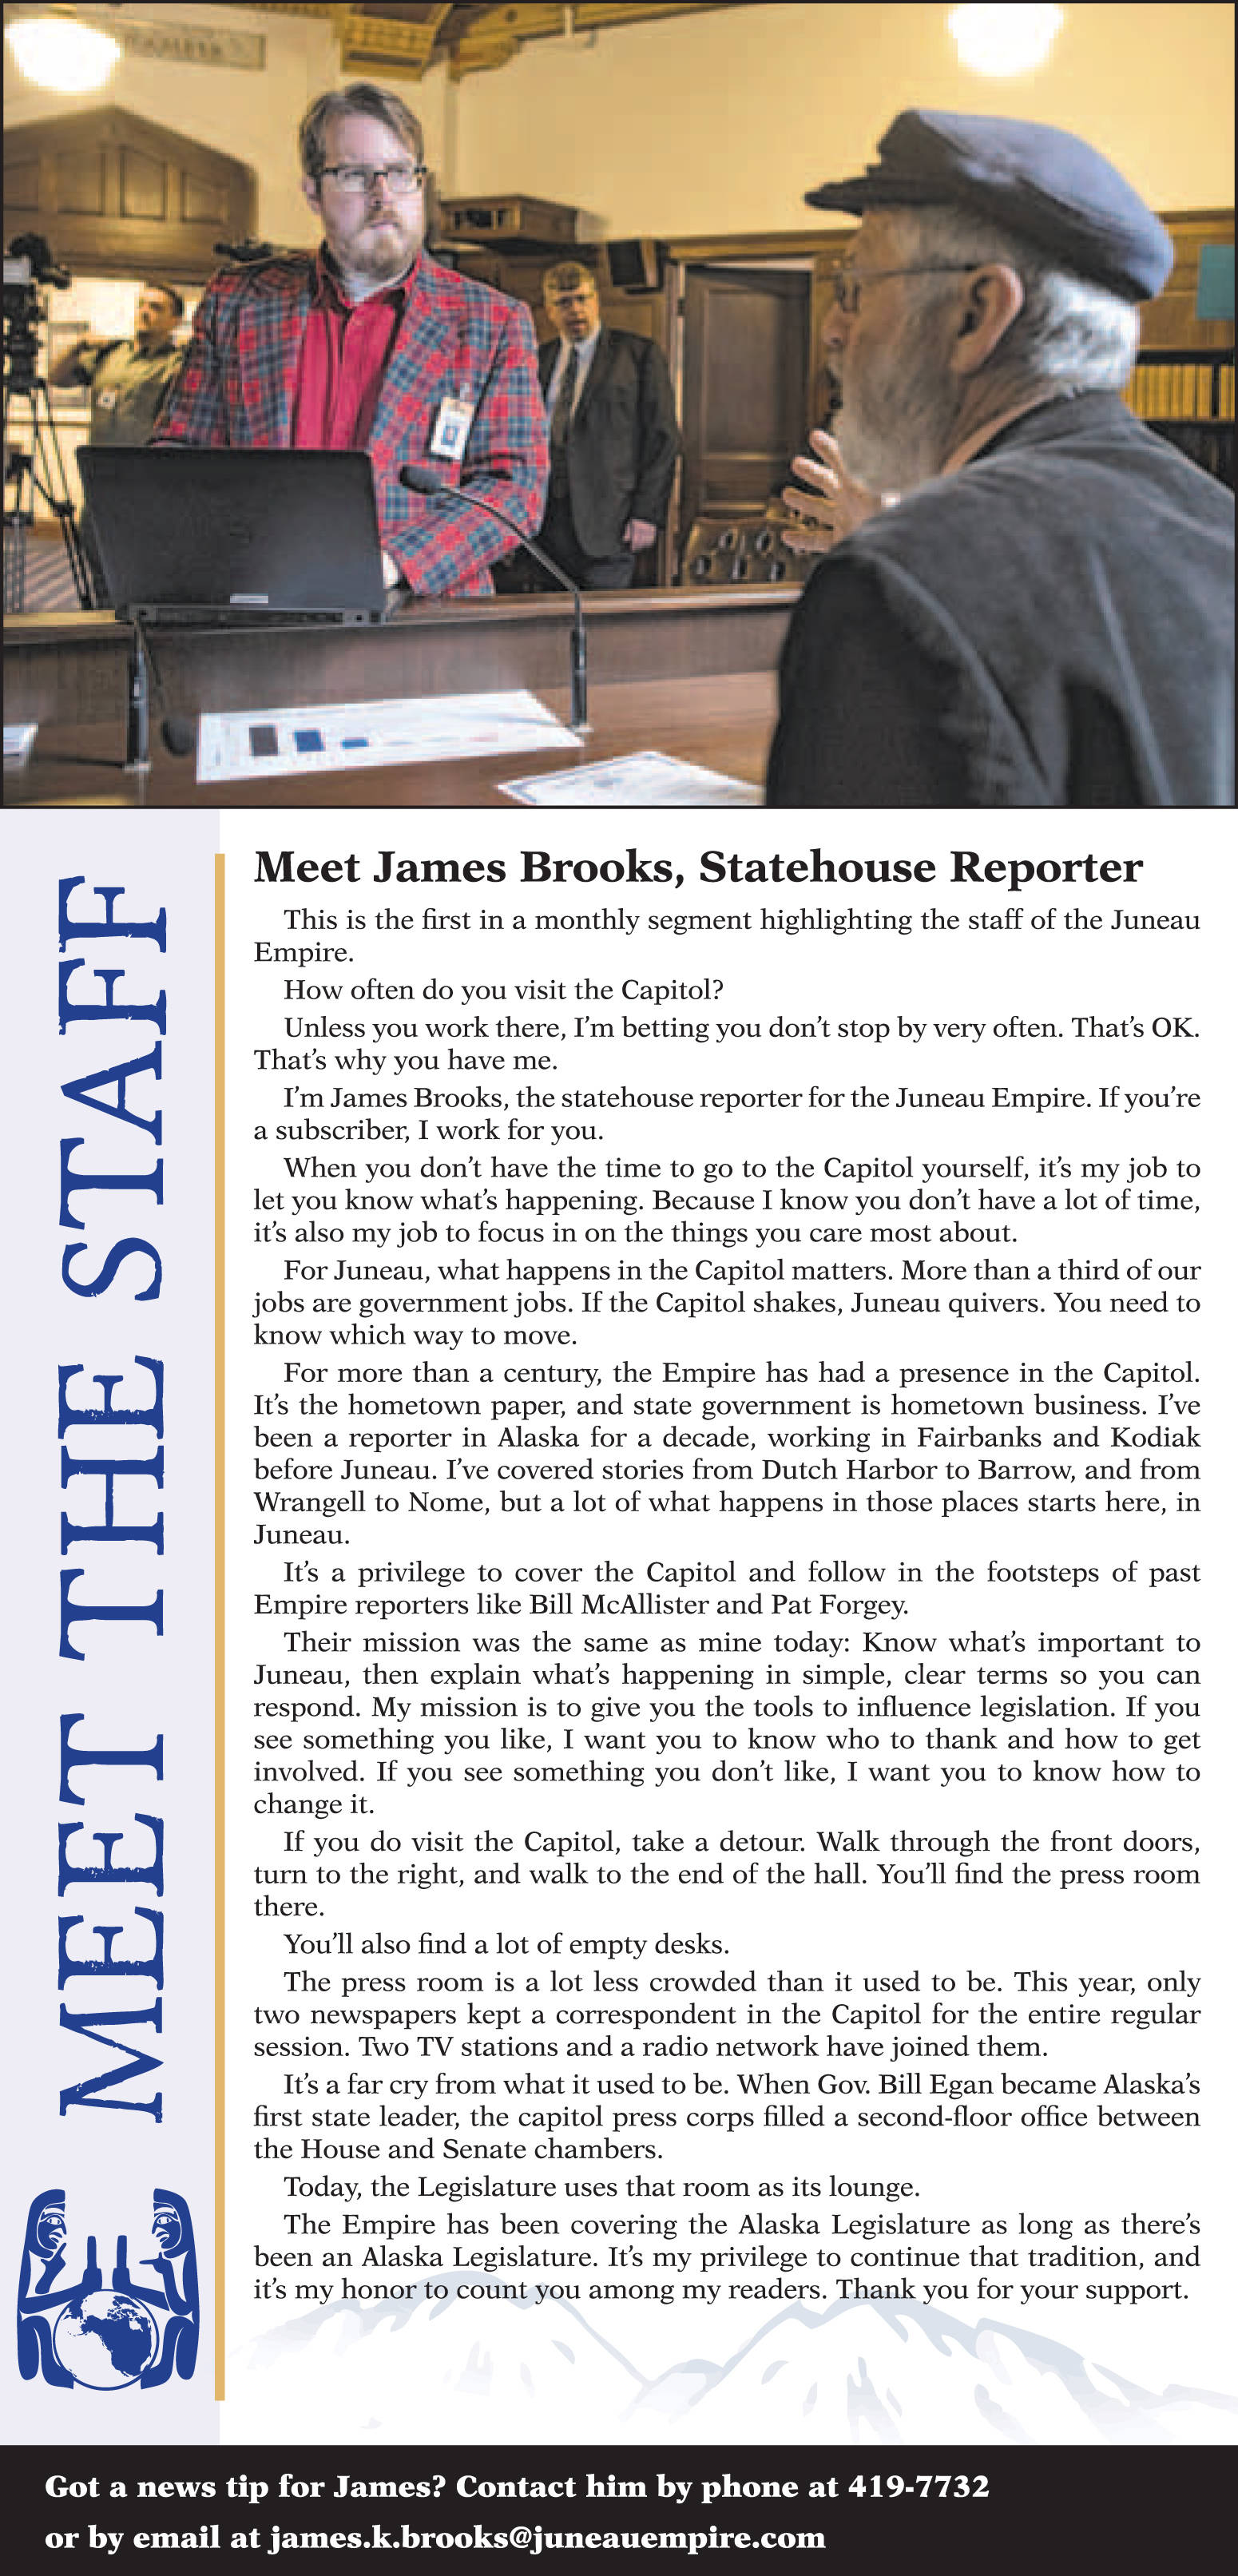 First up, James Brooks, the Empire’s statehouse reporter